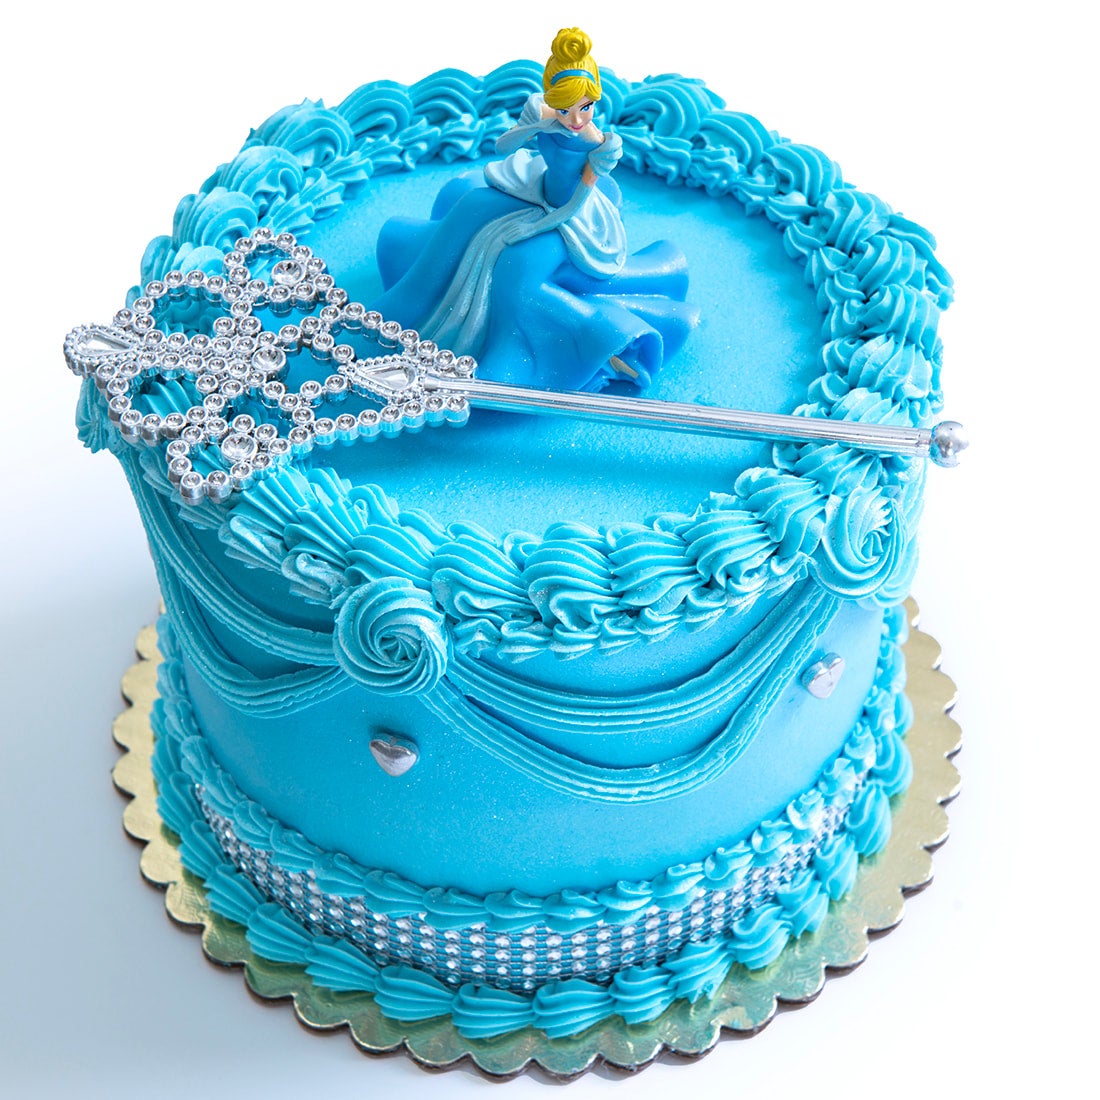 Cinderella cake: HERE Discover the most popular ideas ❤️